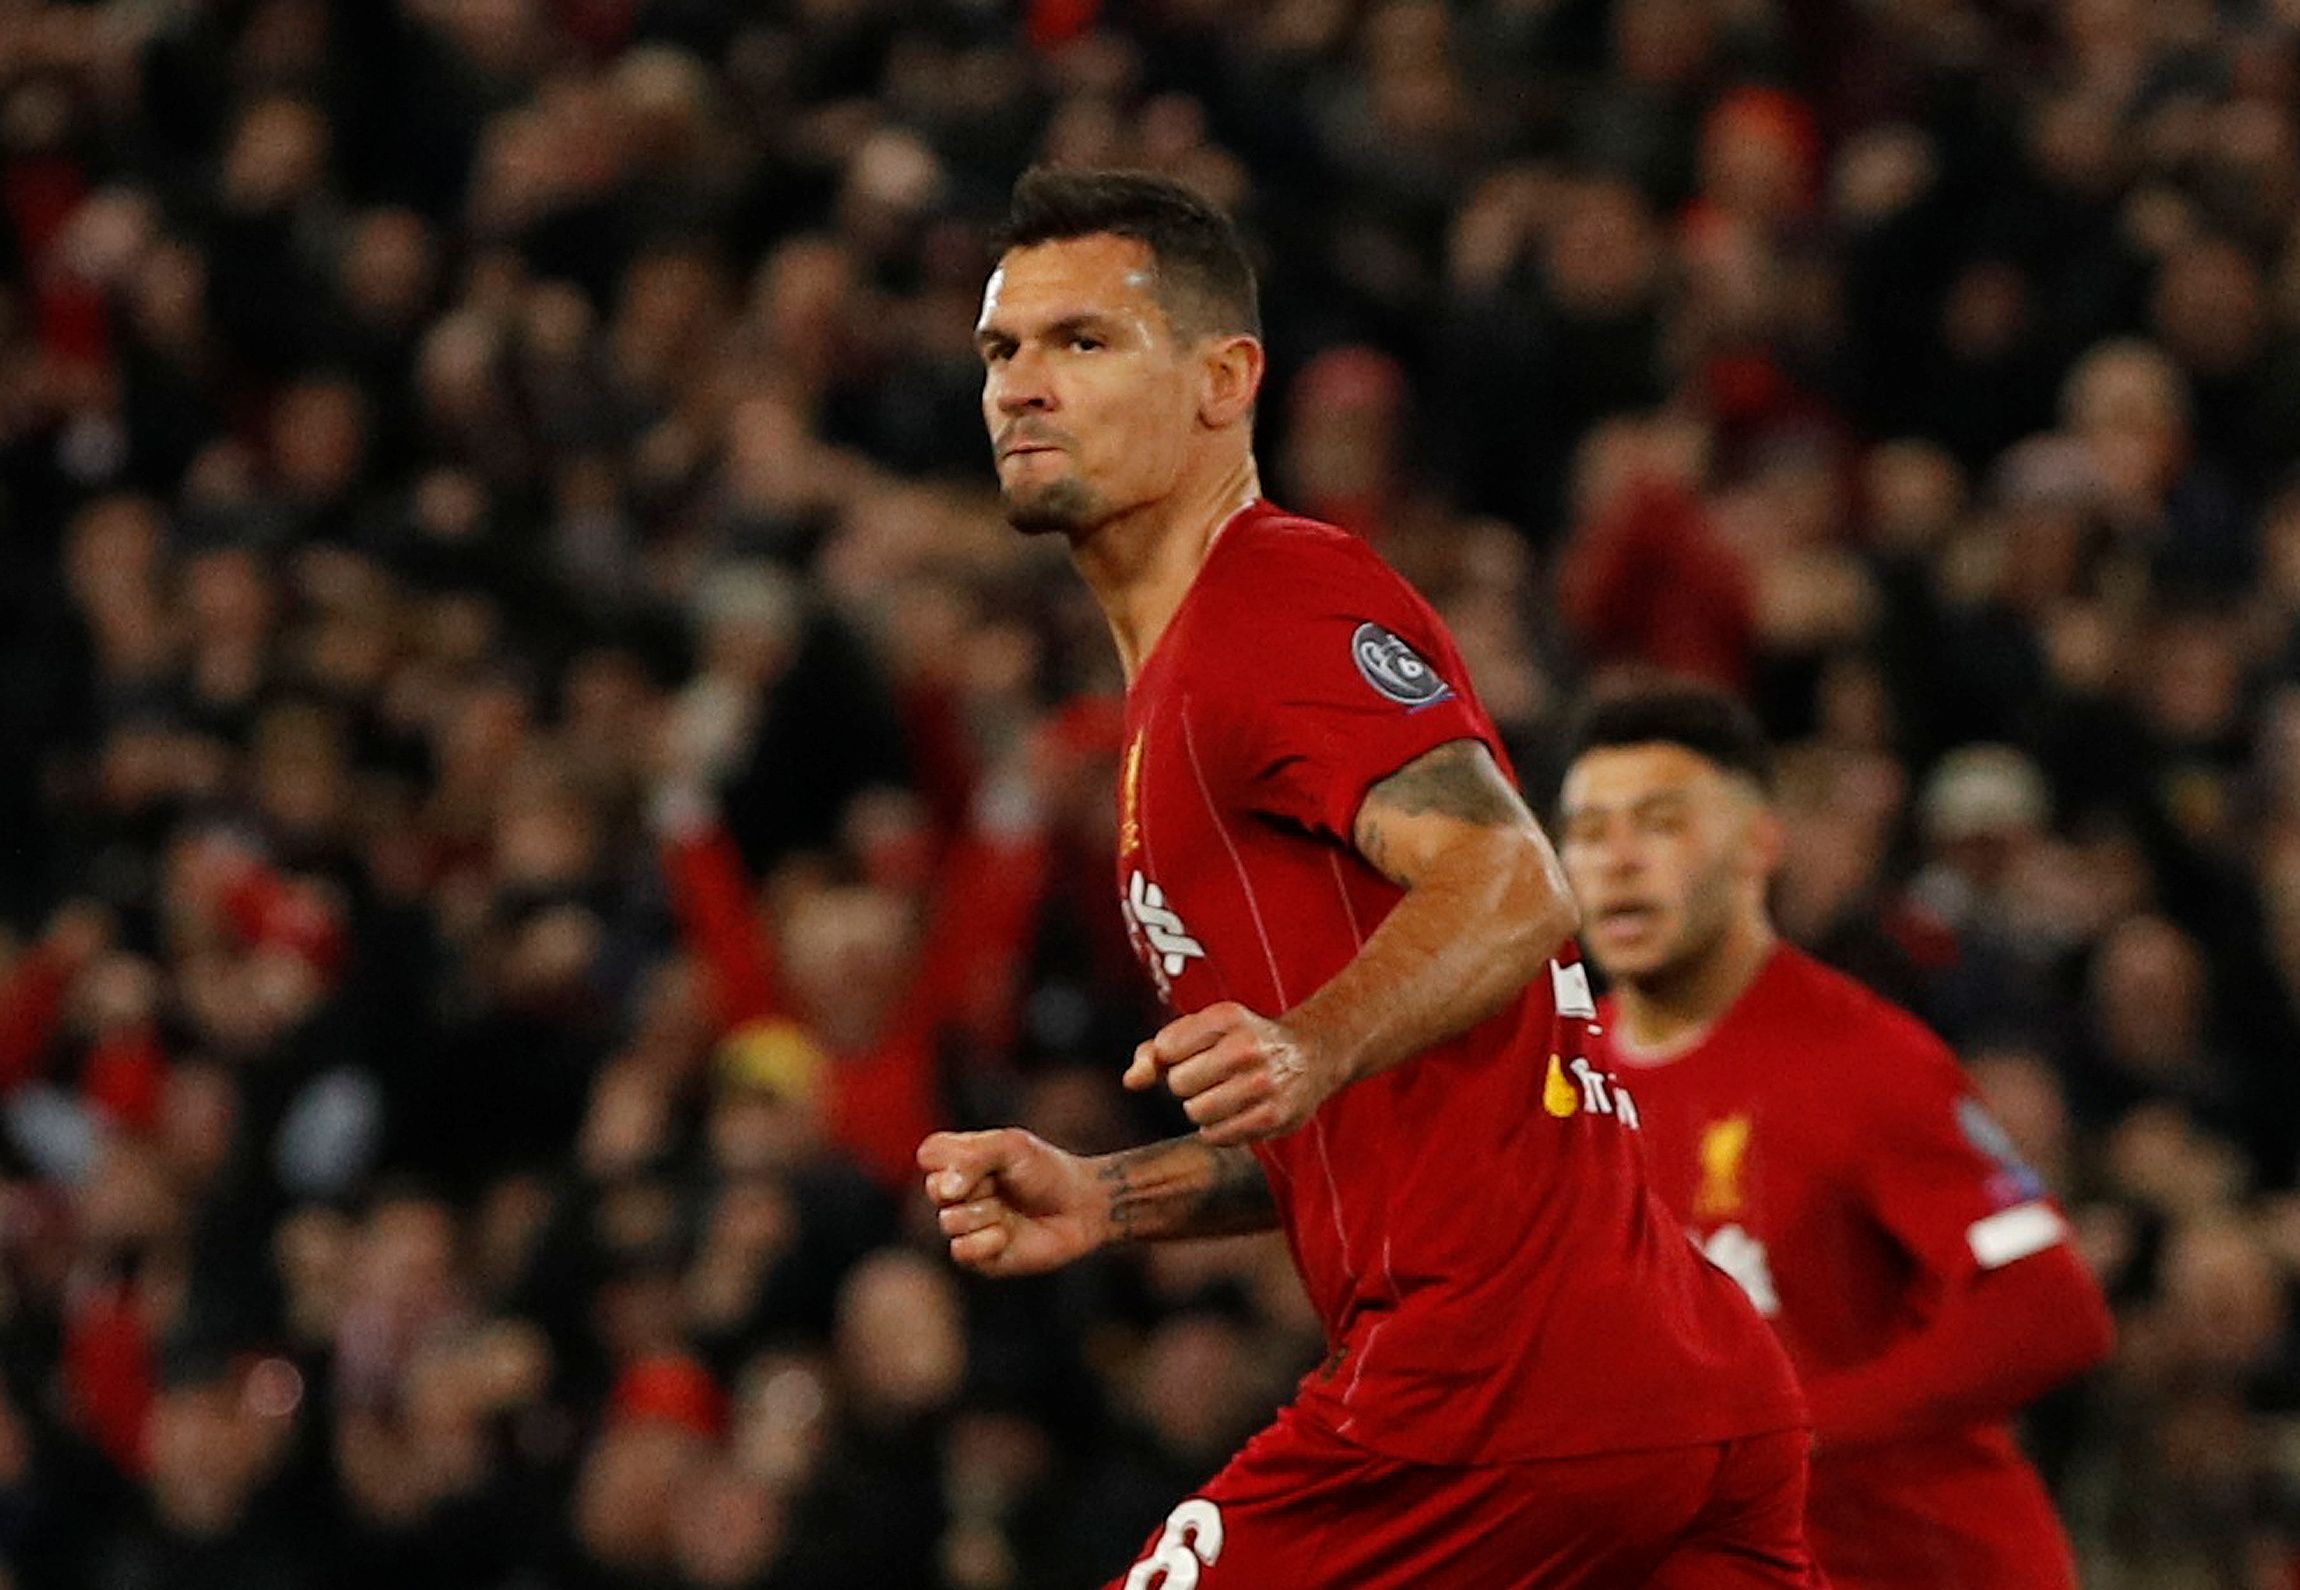 Soccer Football - Champions League - Group E - Liverpool v Napoli - Anfield, Liverpool, Britain - November 27, 2019  Liverpool's Dejan Lovren celebrates scoring their first goal   REUTERS/Phil Noble